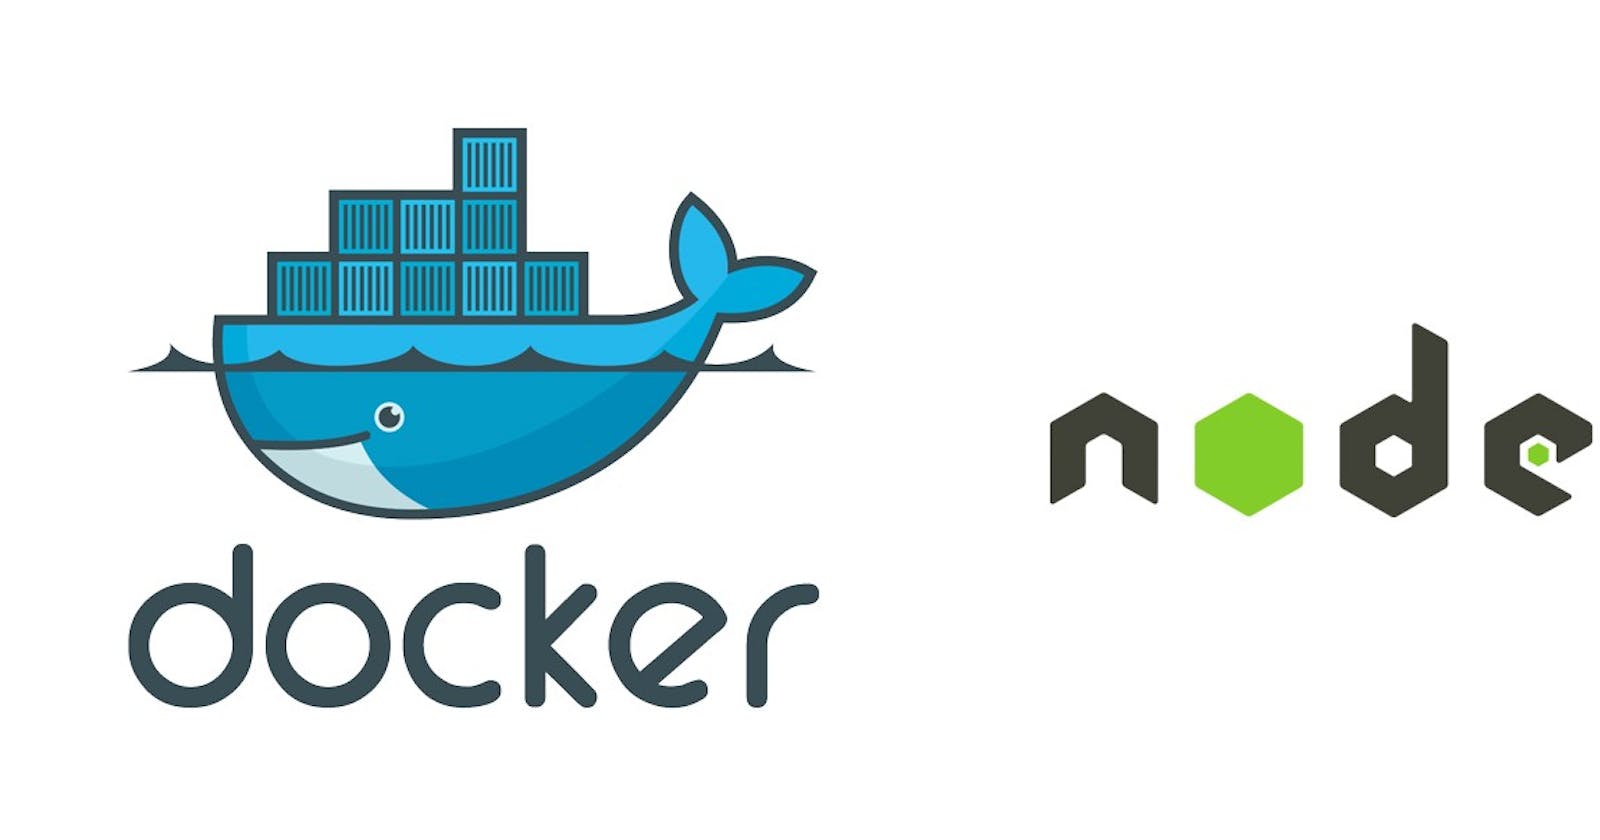 How to host your Node app in a Docker Container on Heroku